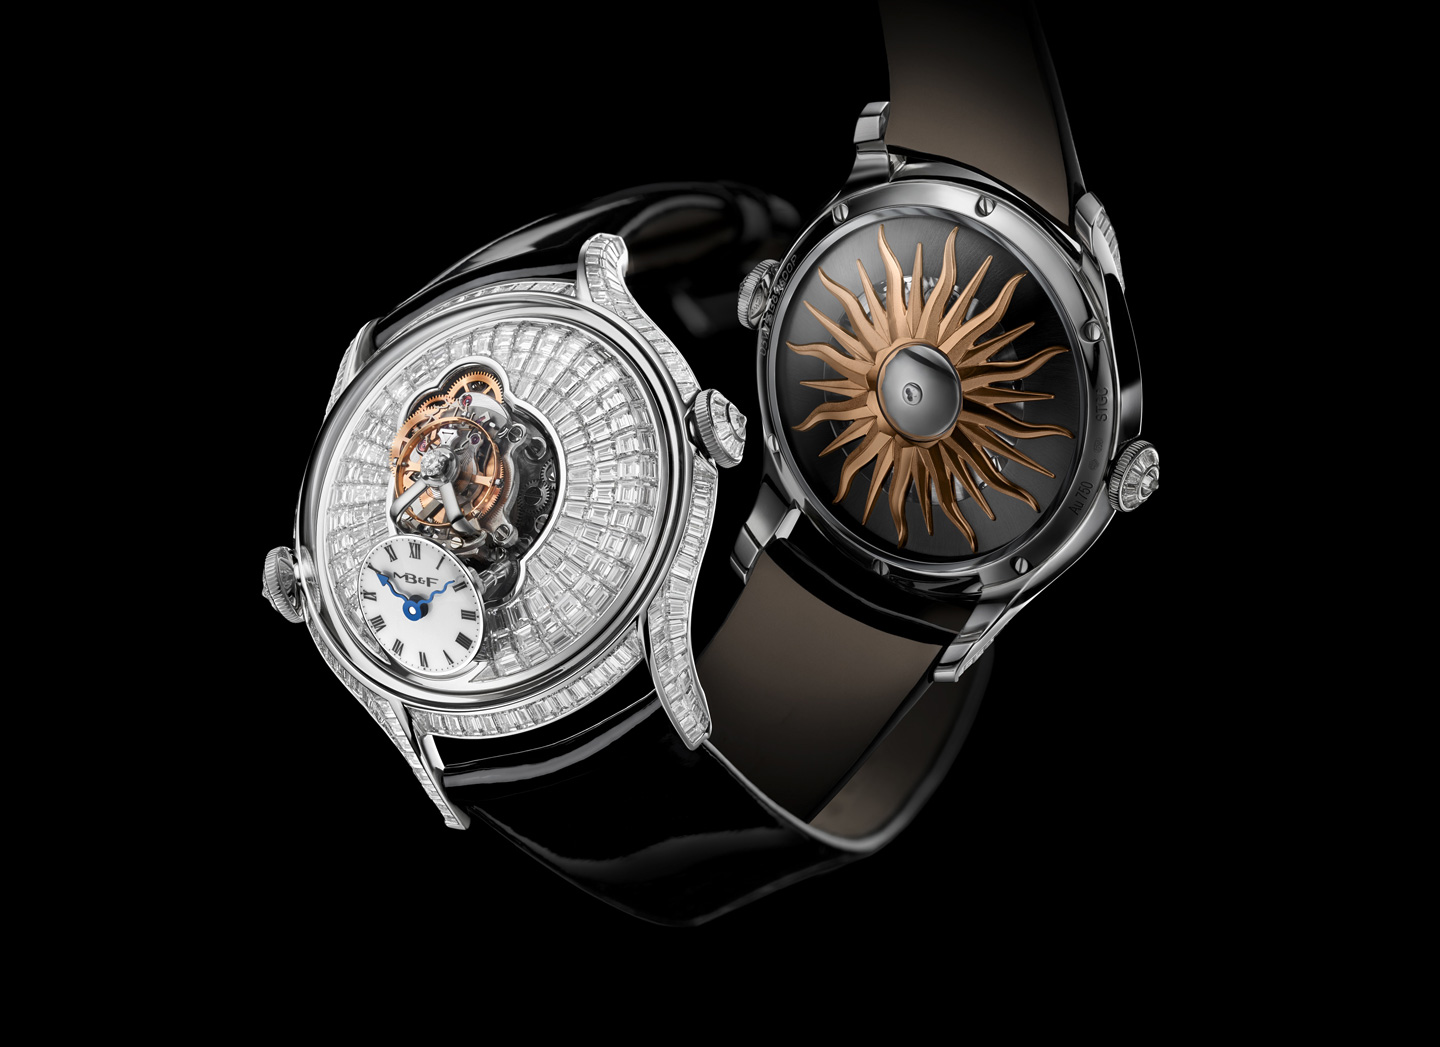 Baselworld 2019: MB&F Legacy Machine Flying Tourbillon Watch –   – Featuring Watch Reviews, Critiques, Reports & News